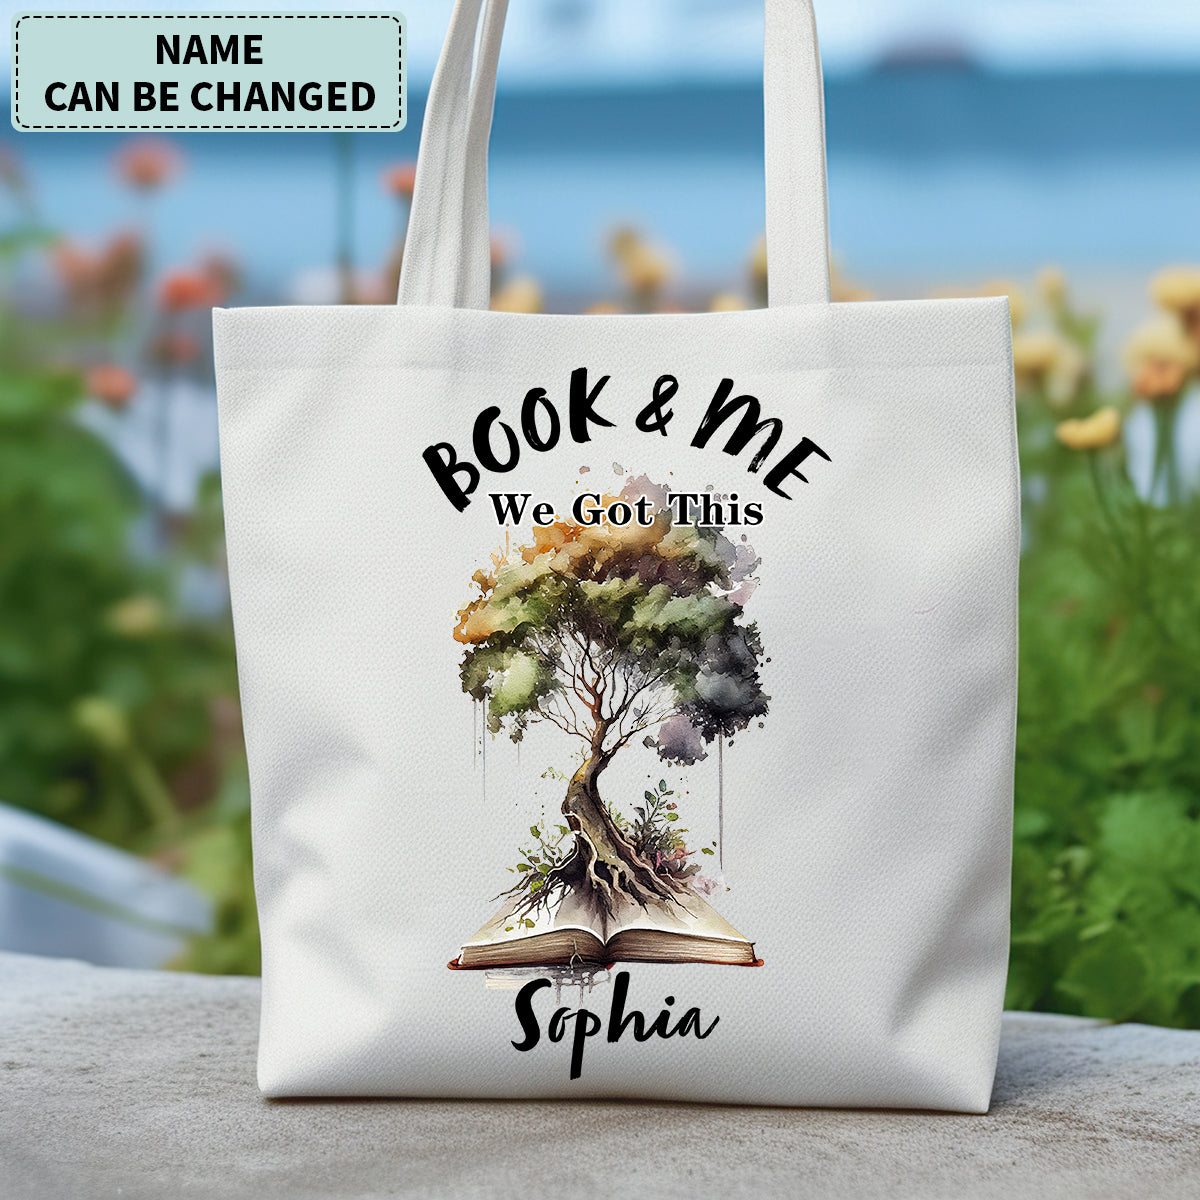 Personalized We Got This Book and Me Tote Bag